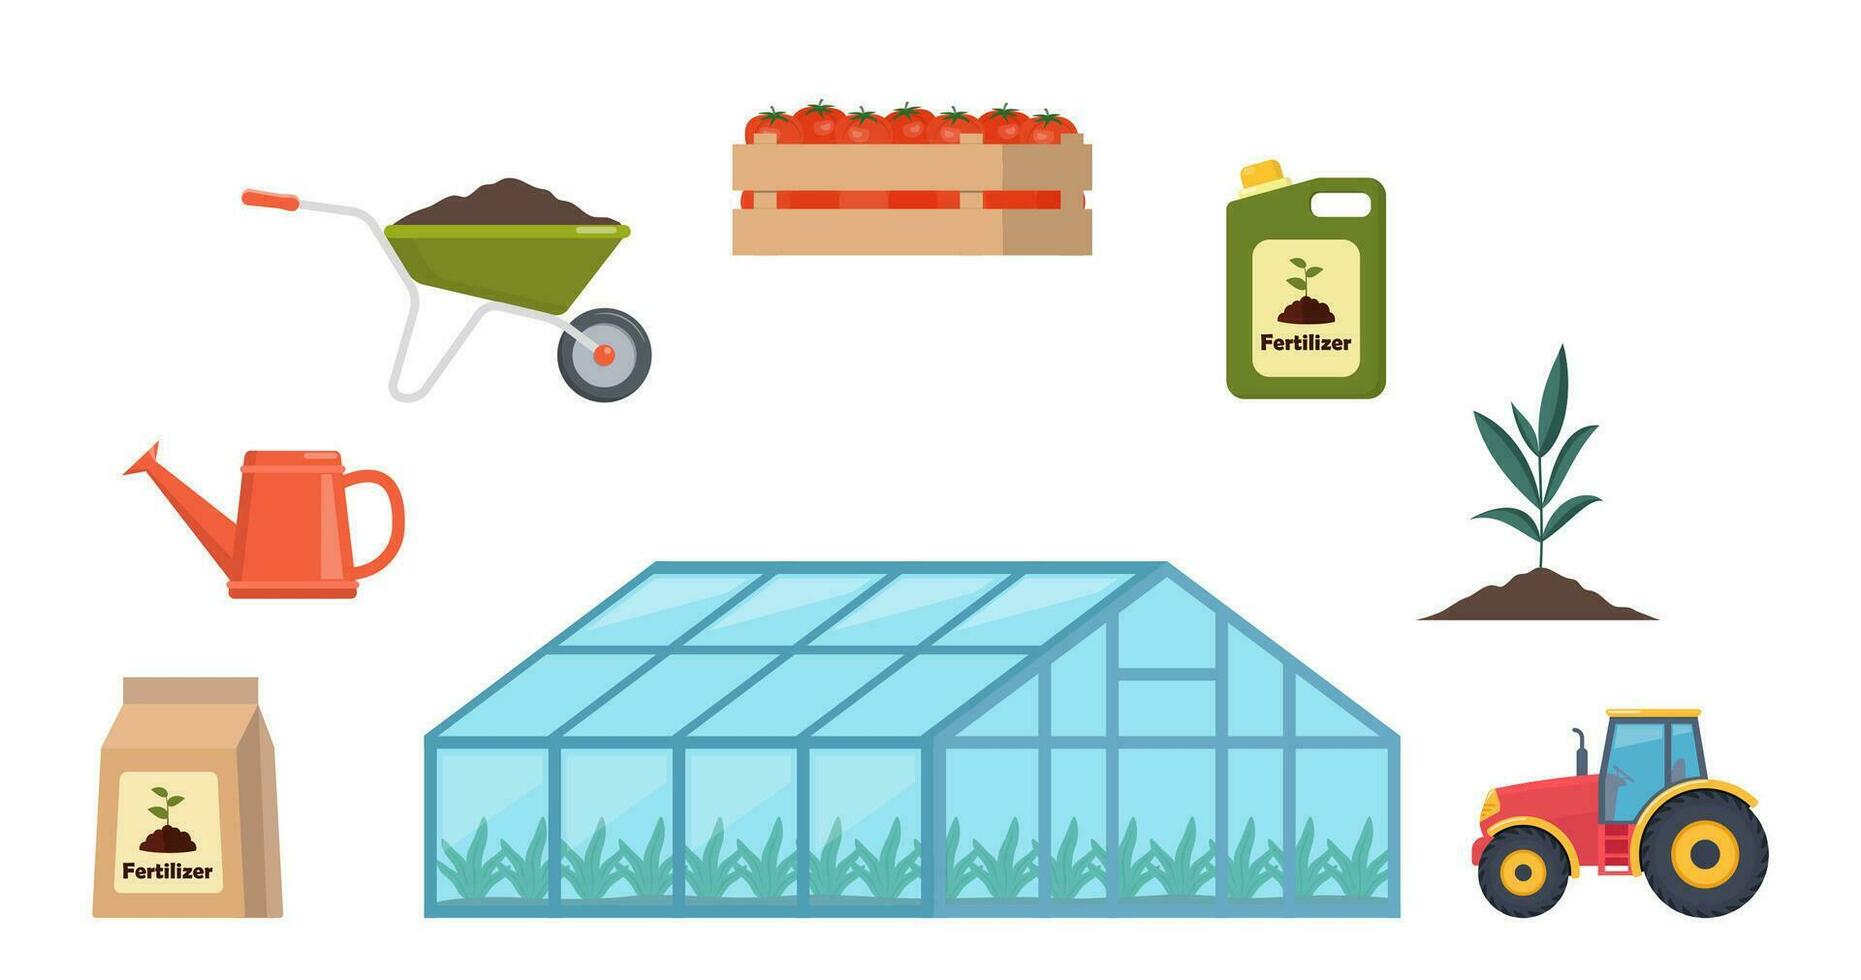 Greenhouse and different farm elements. Fertilizers, tractor, cart, watering can. Set of icons on farm theme. Vector illustration.